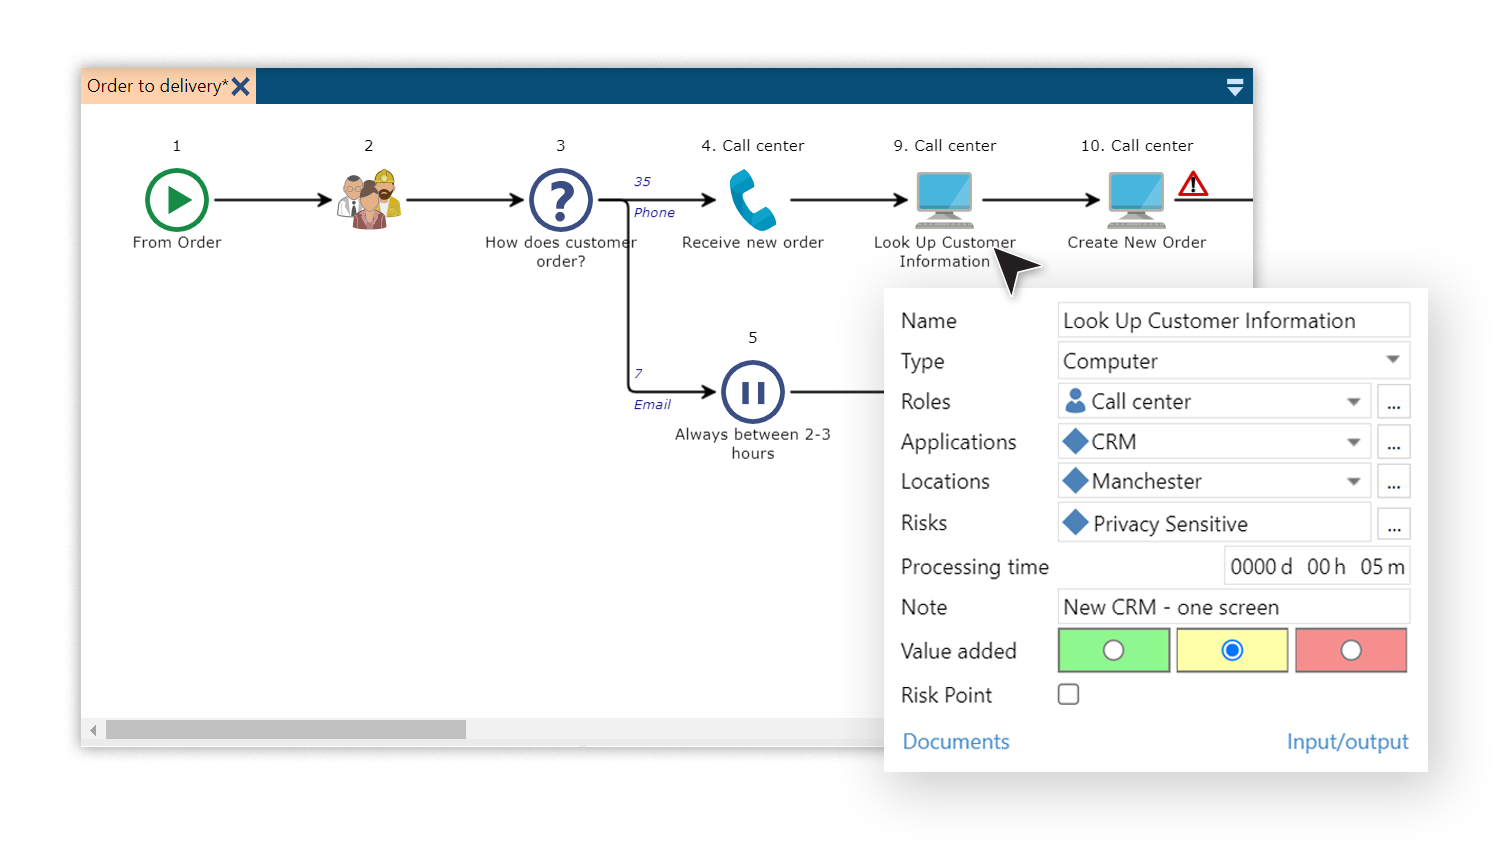 Map your process instantly with the drag & drop functionality. Use intuitive icons and add information such as roles, documents, systems, time and costs. This way, anyone can read and understand the process.